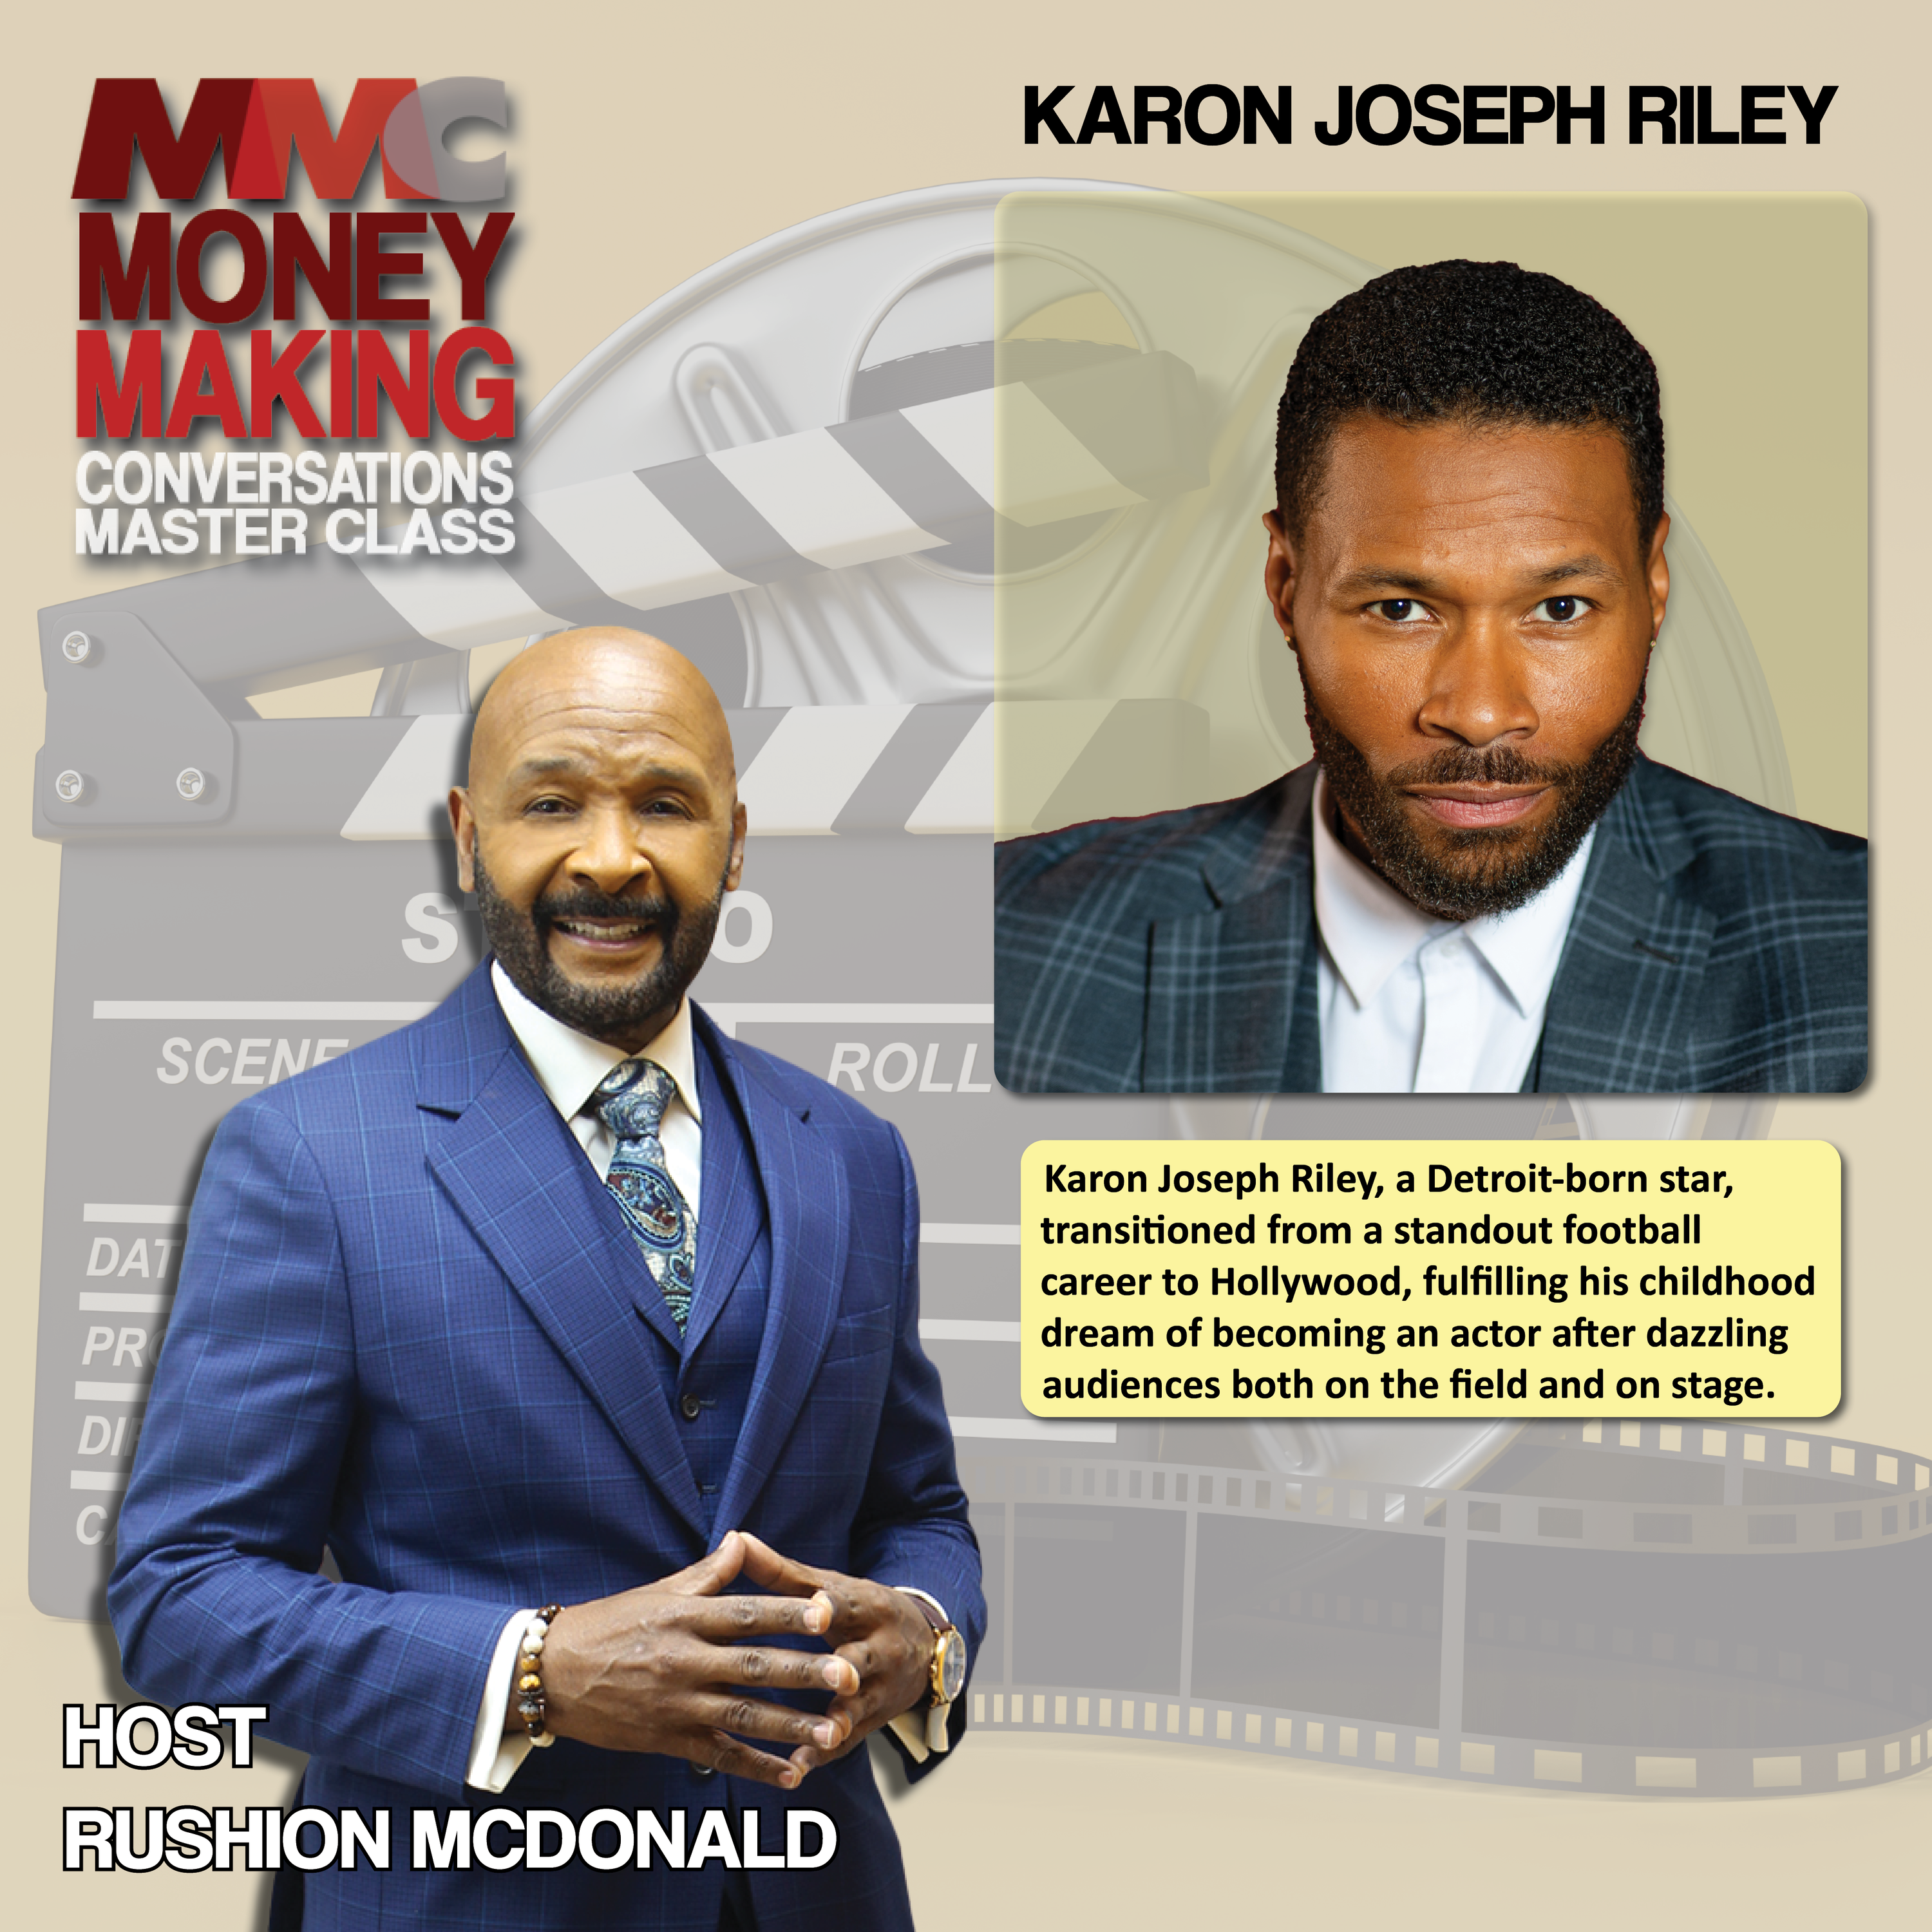 Former NFL Player turned Hollywood actor starring in The Black Hamptons on BET+ and celebrity spokesman for Sickle Cell Foundation of Georgia, Karon Joseph Riley.